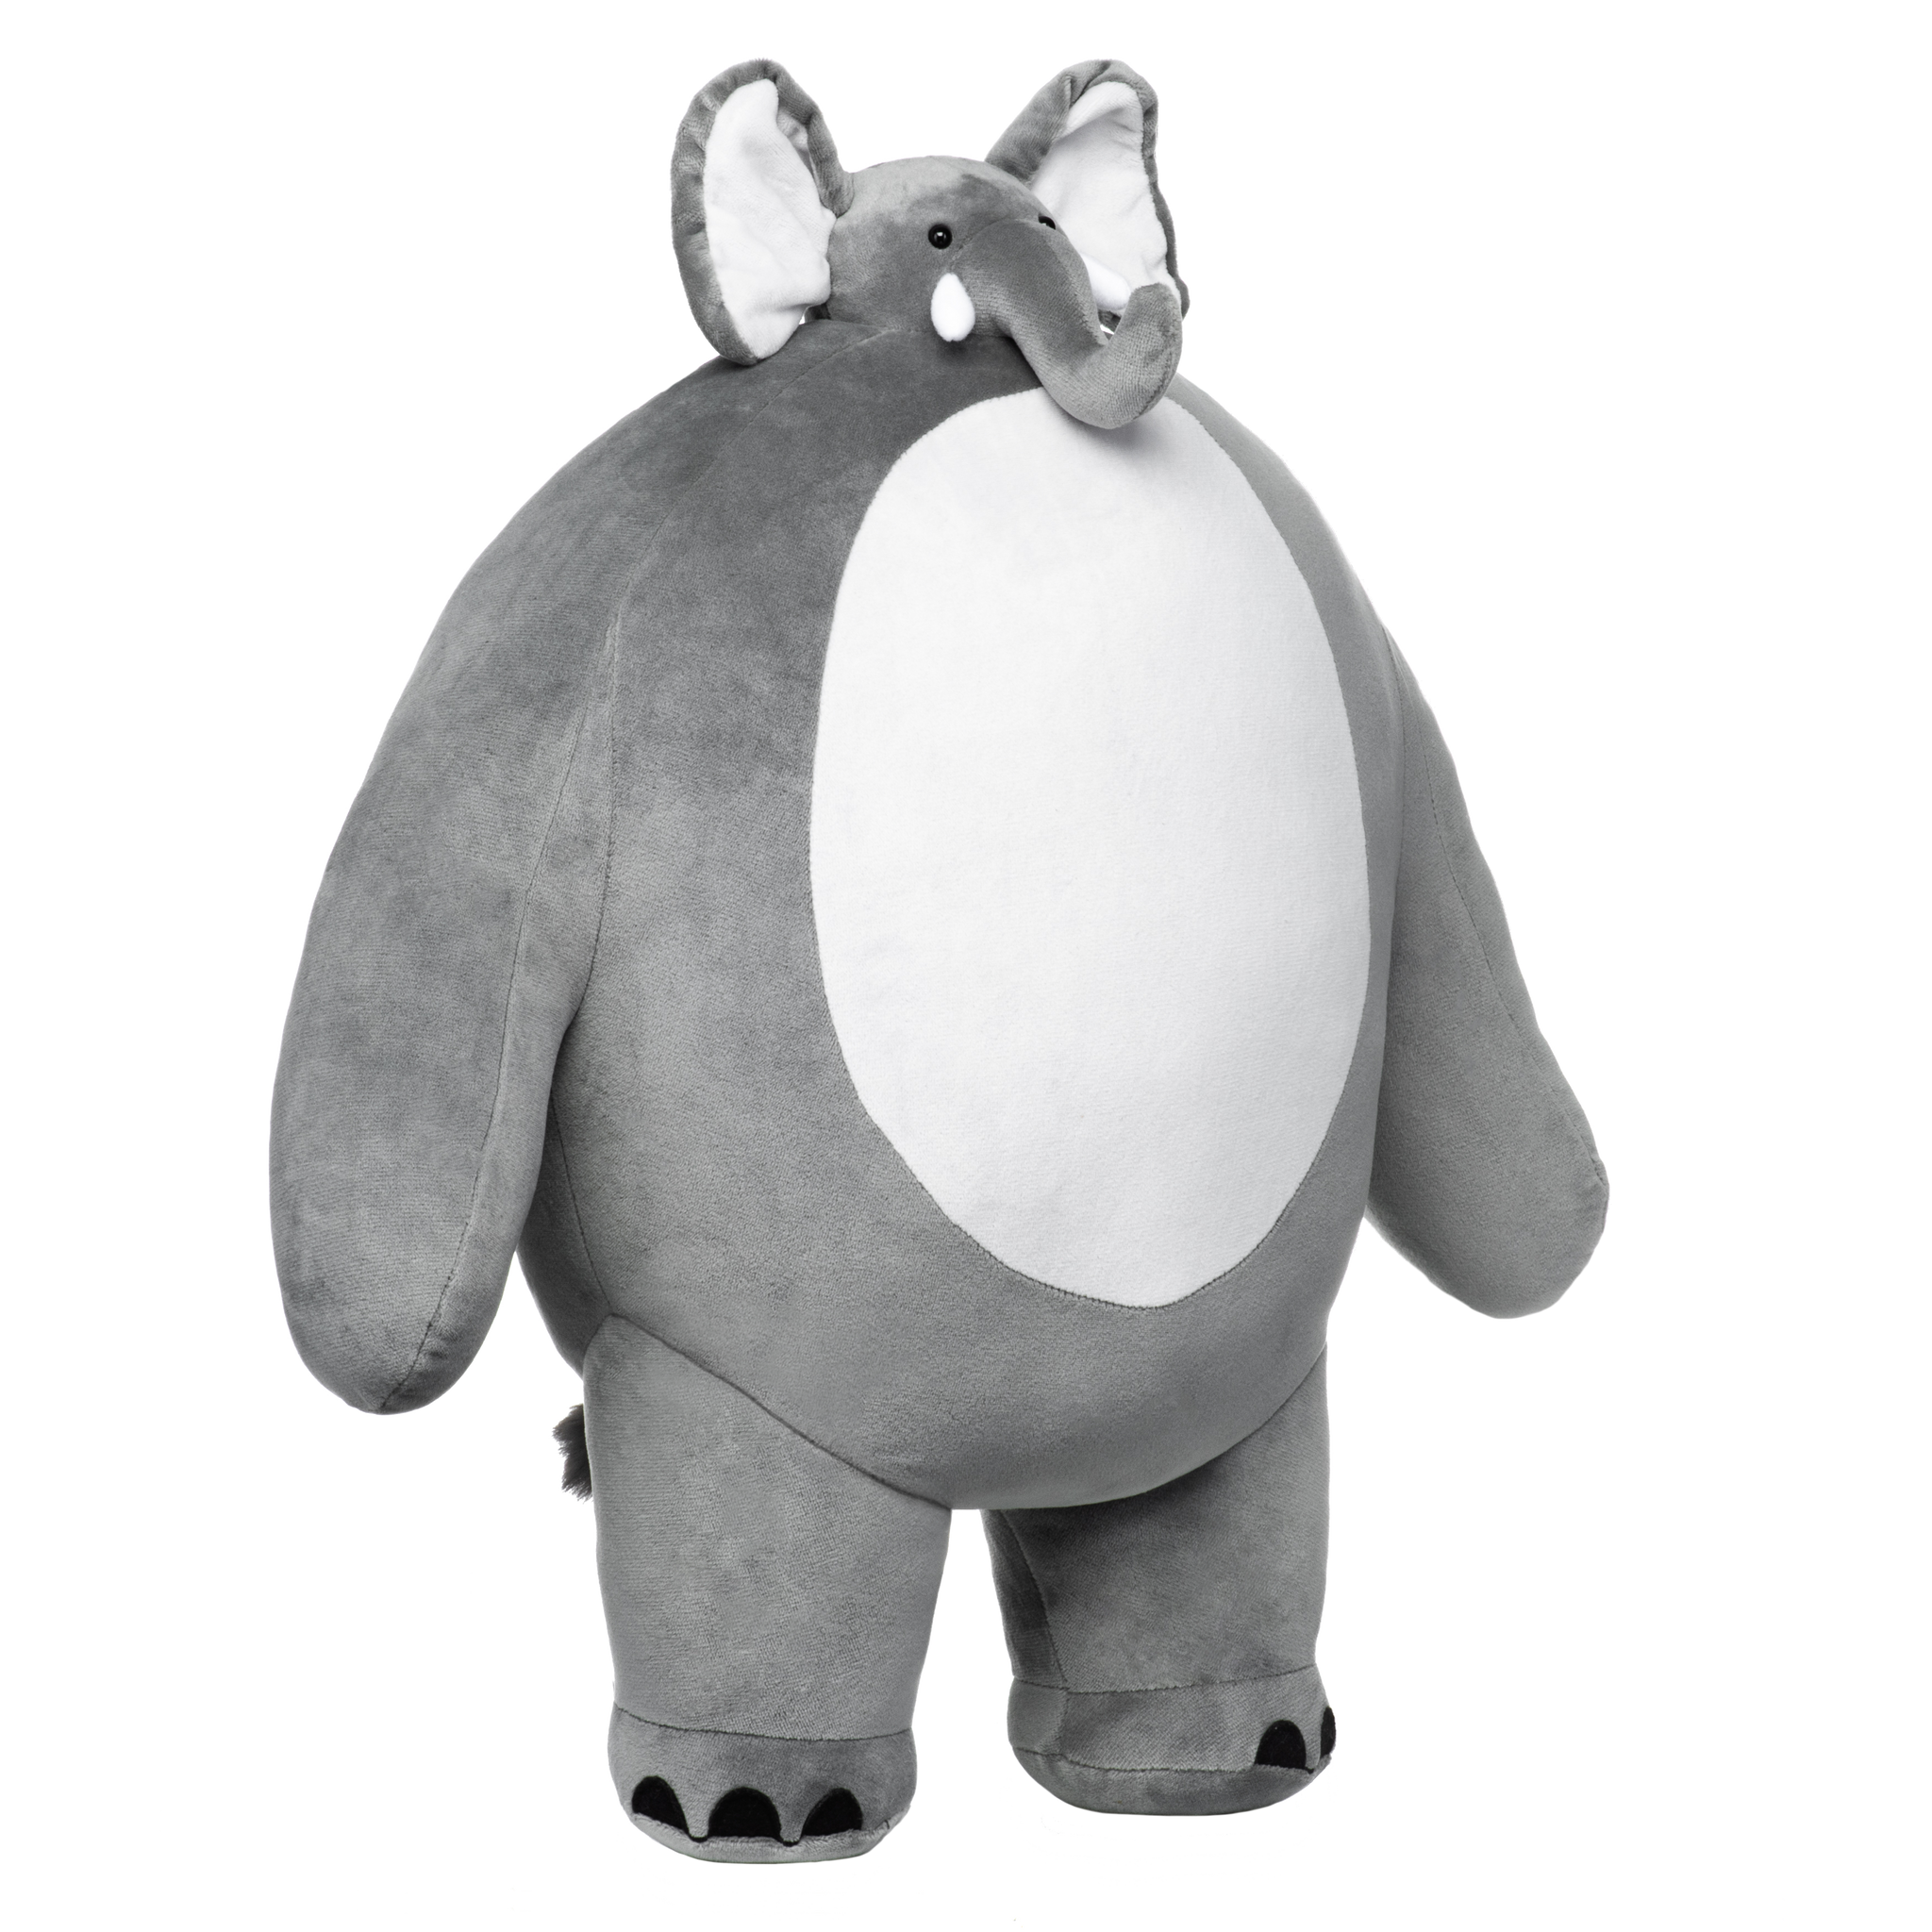 stuffed animal with big body and small head